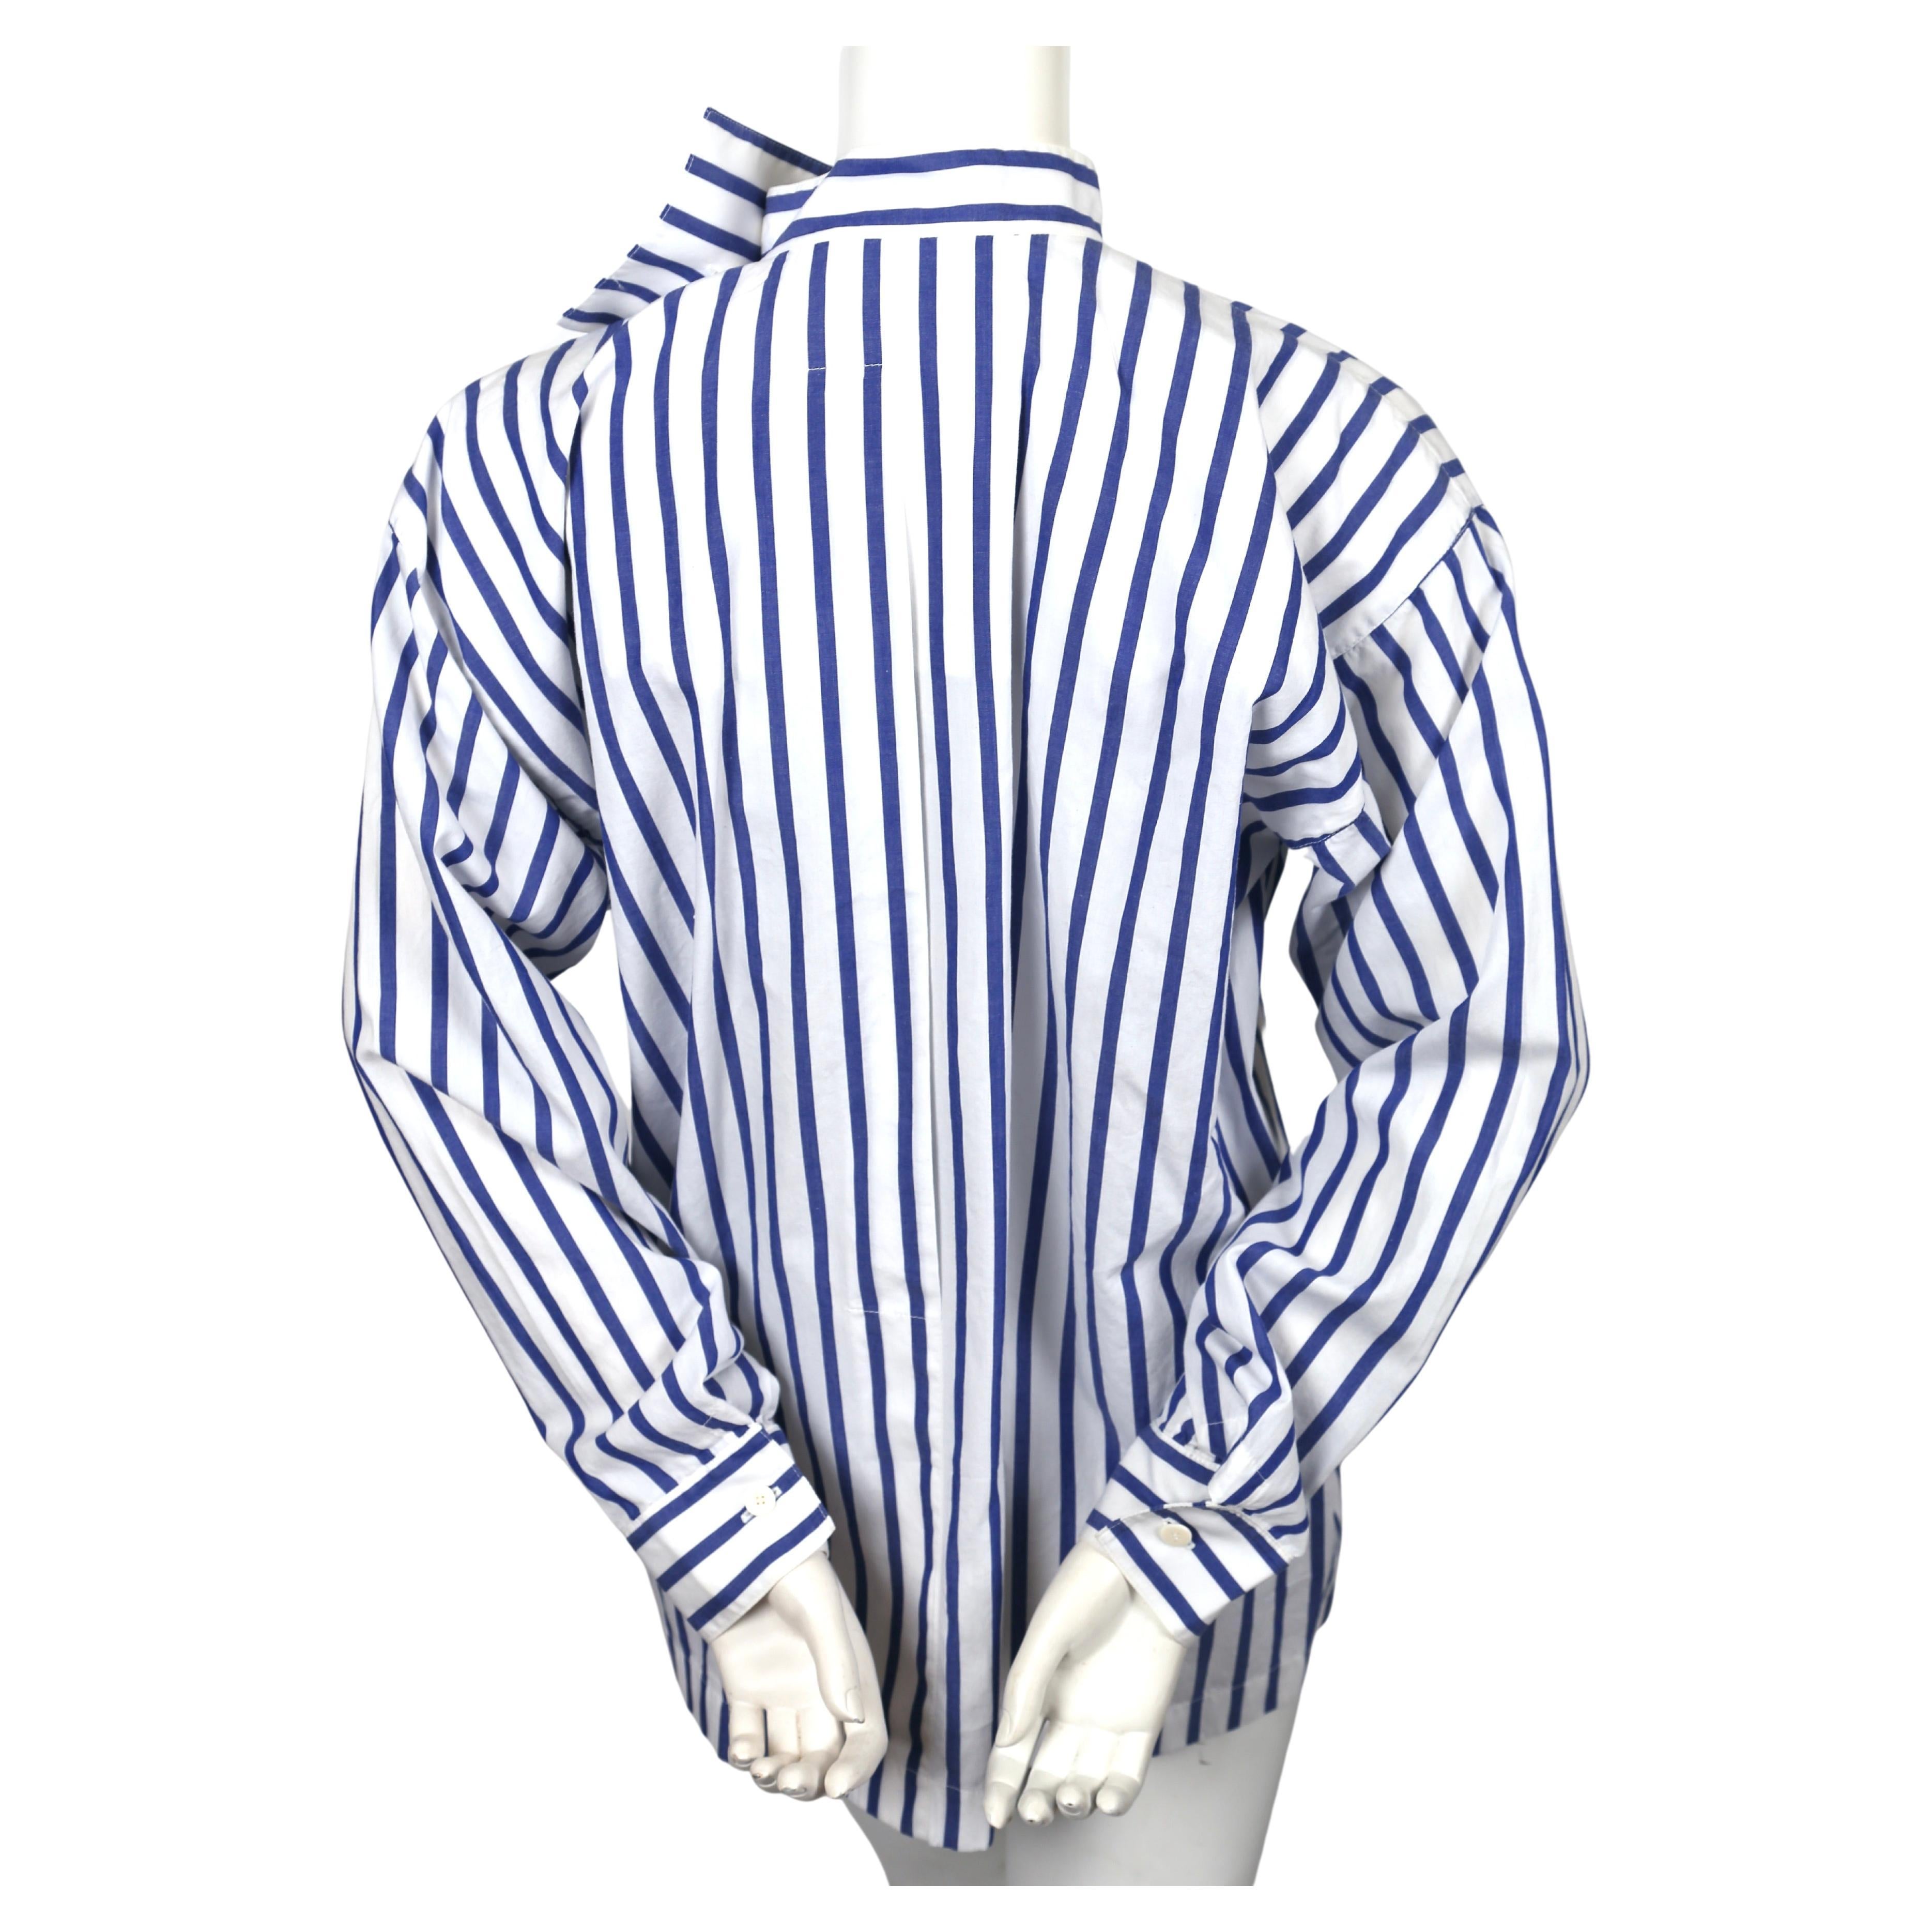 1980's ISSEY MIYAKE blue and white striped cotton shirt with draped neckline For Sale 2